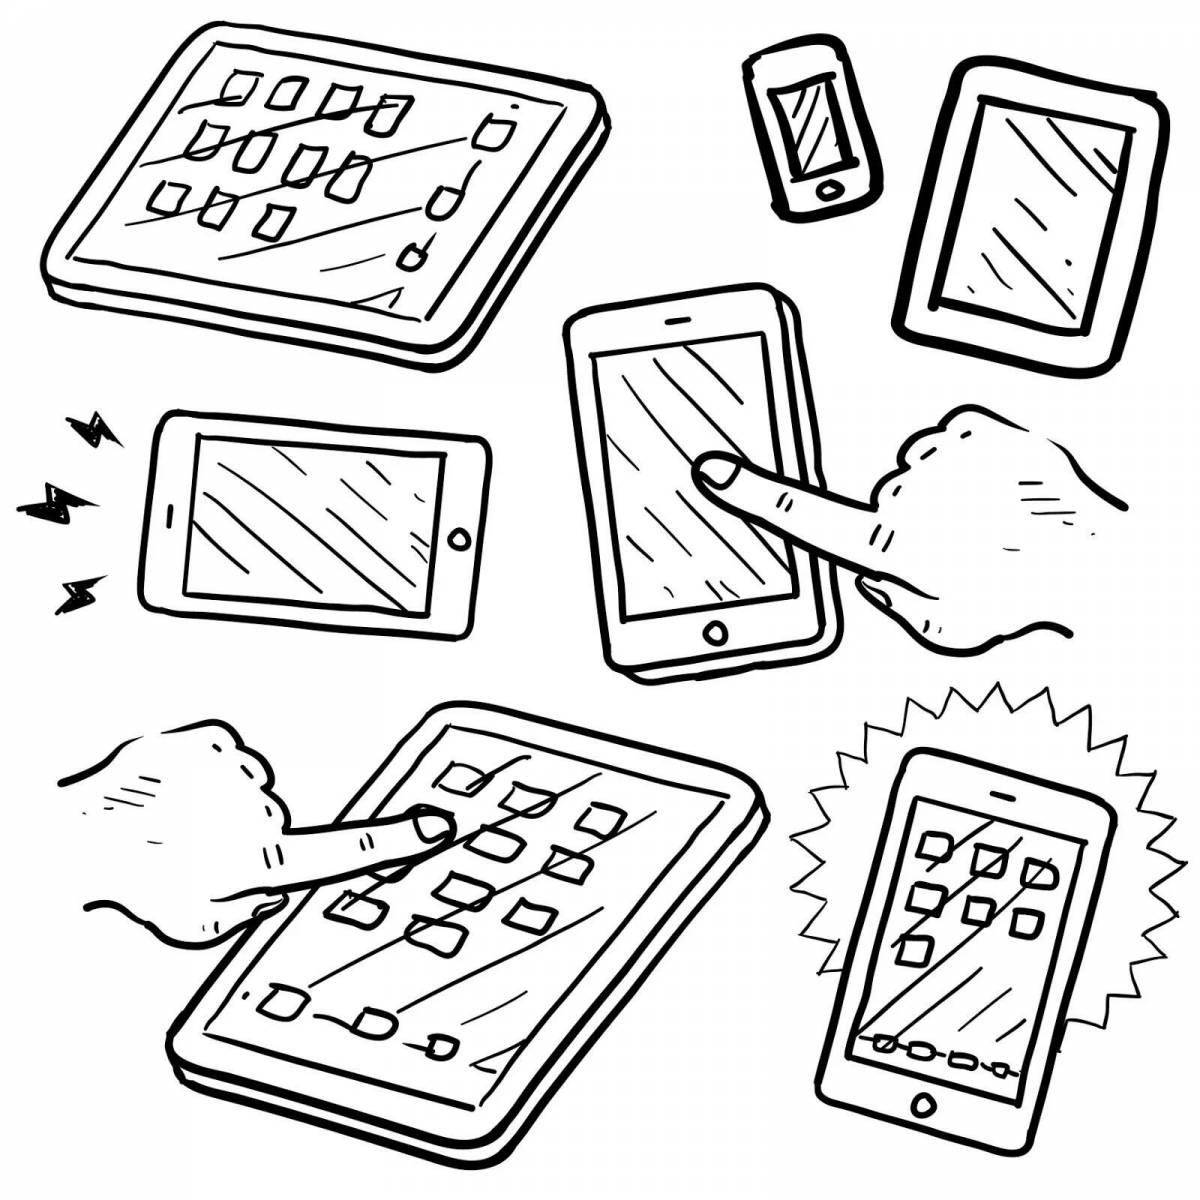 Wonderful phones and tablets coloring book